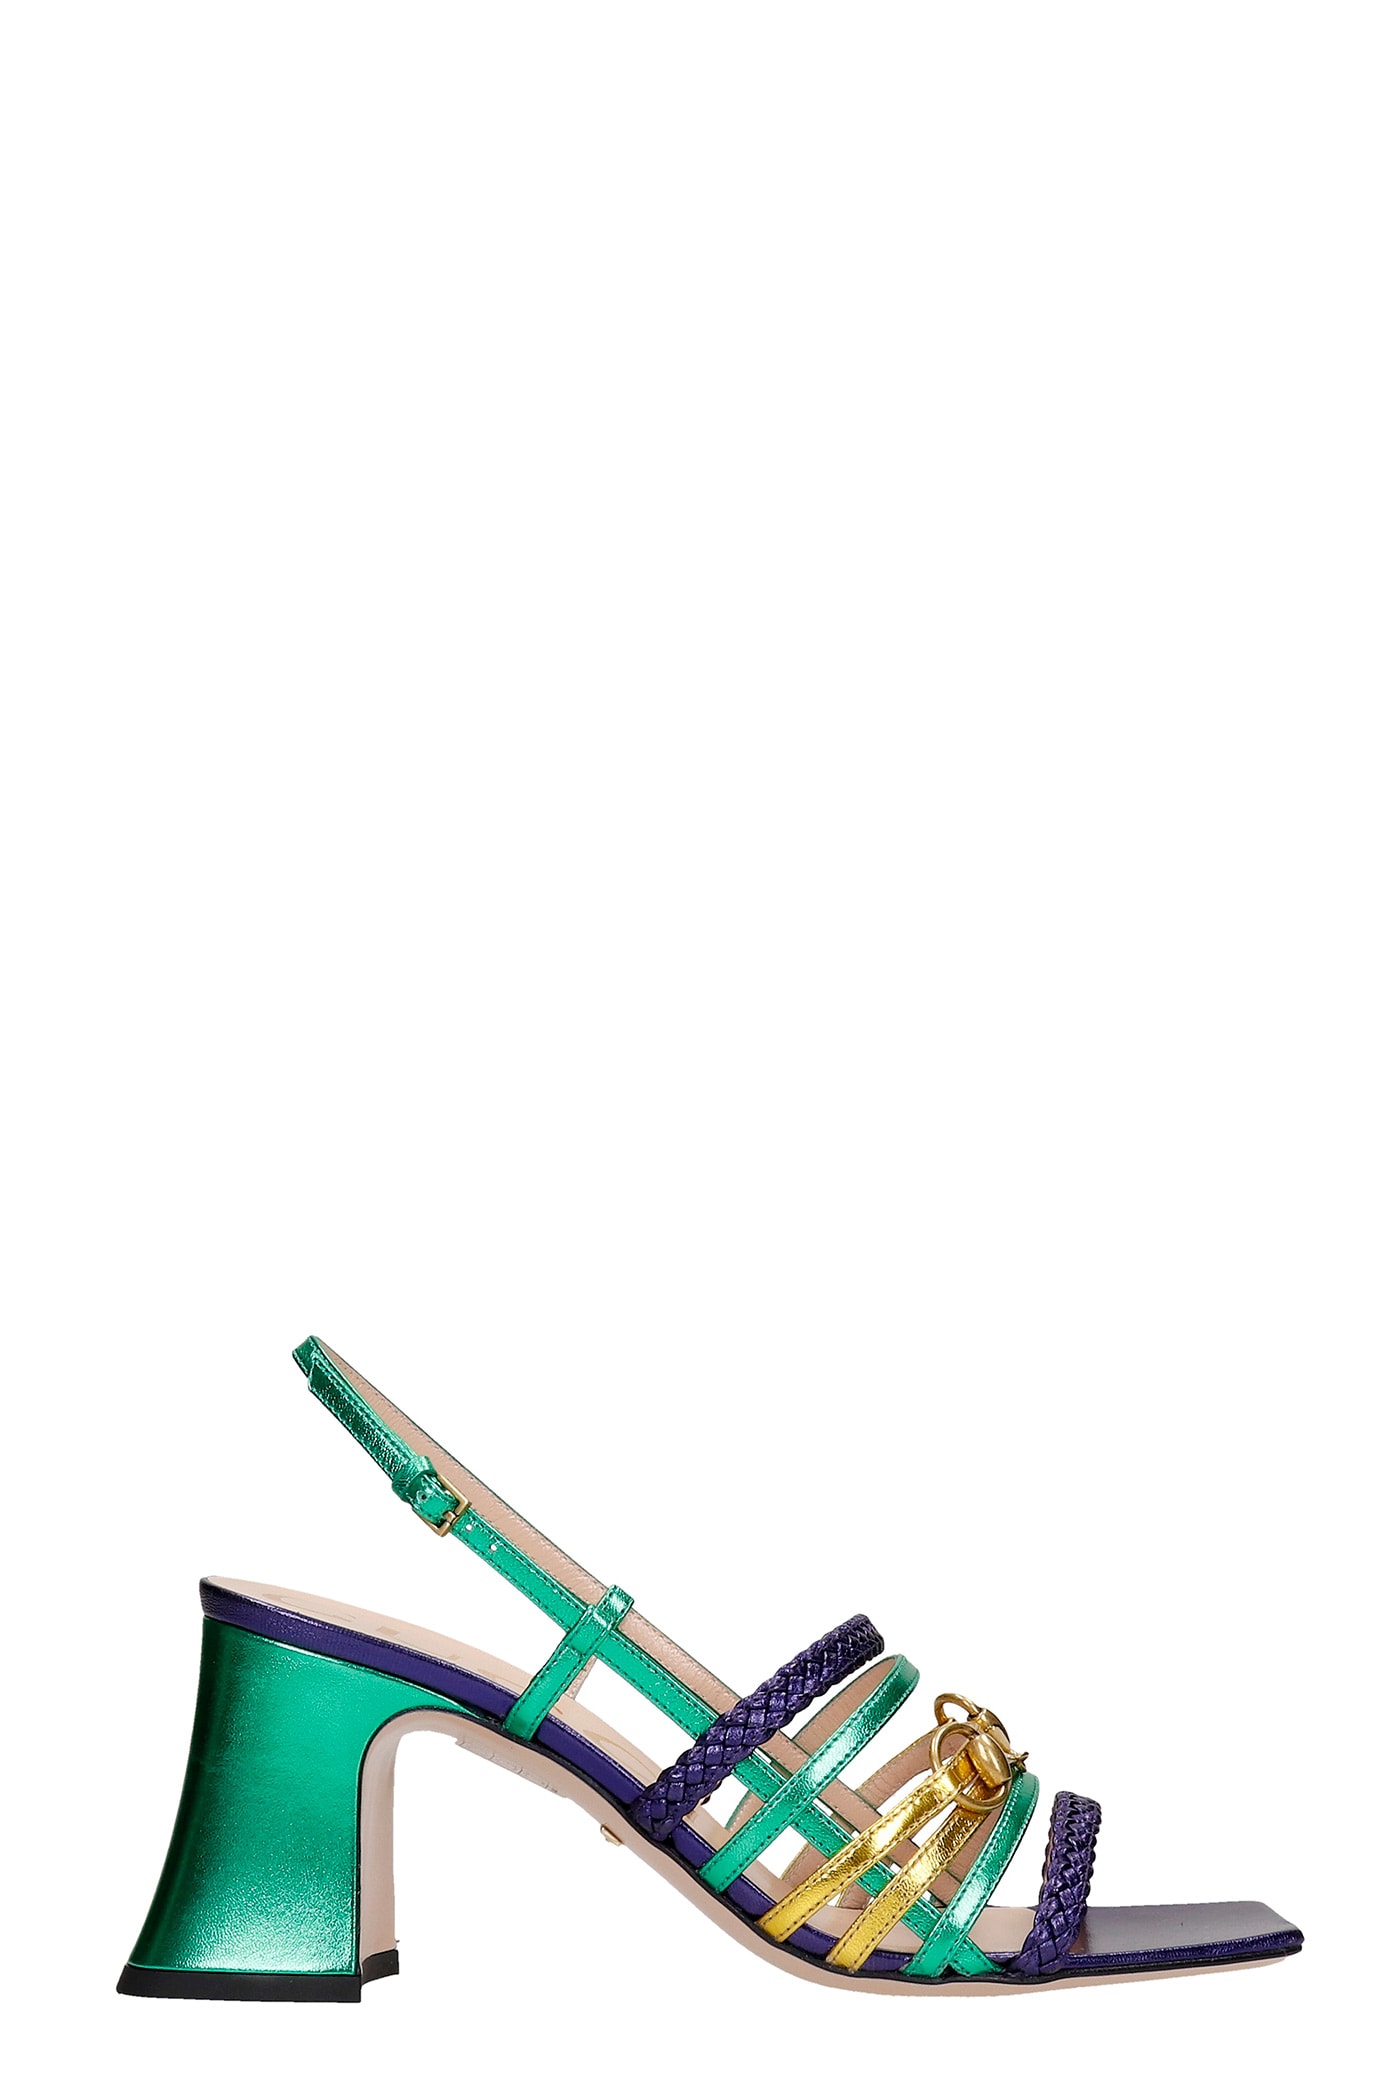 Buy Gucci Sandals In Green Leather online, shop Gucci shoes with free shipping